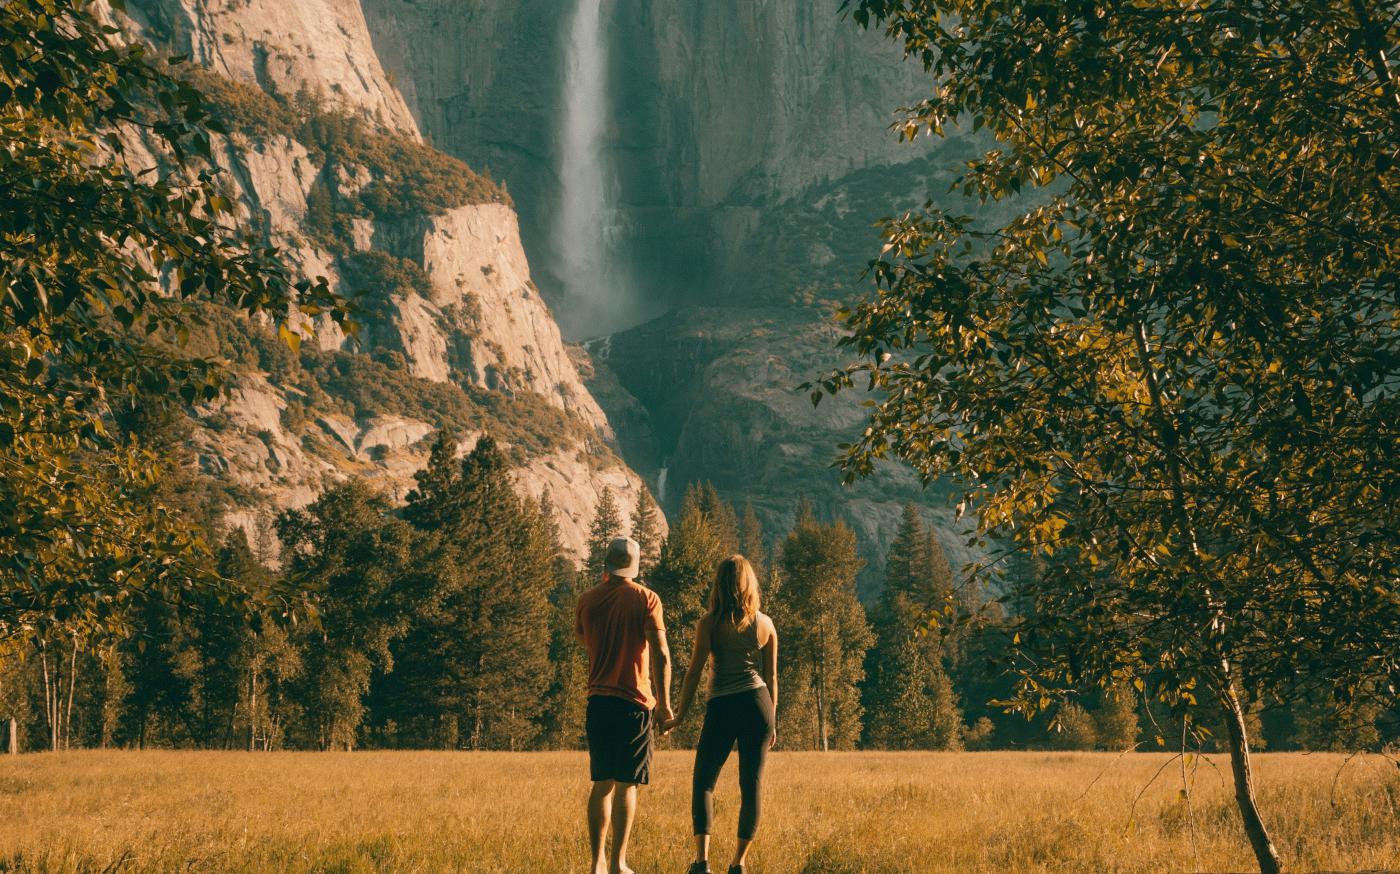 couple standing on tree trunk looking at field and forest by Jared Rice courtesy of Unsplash.